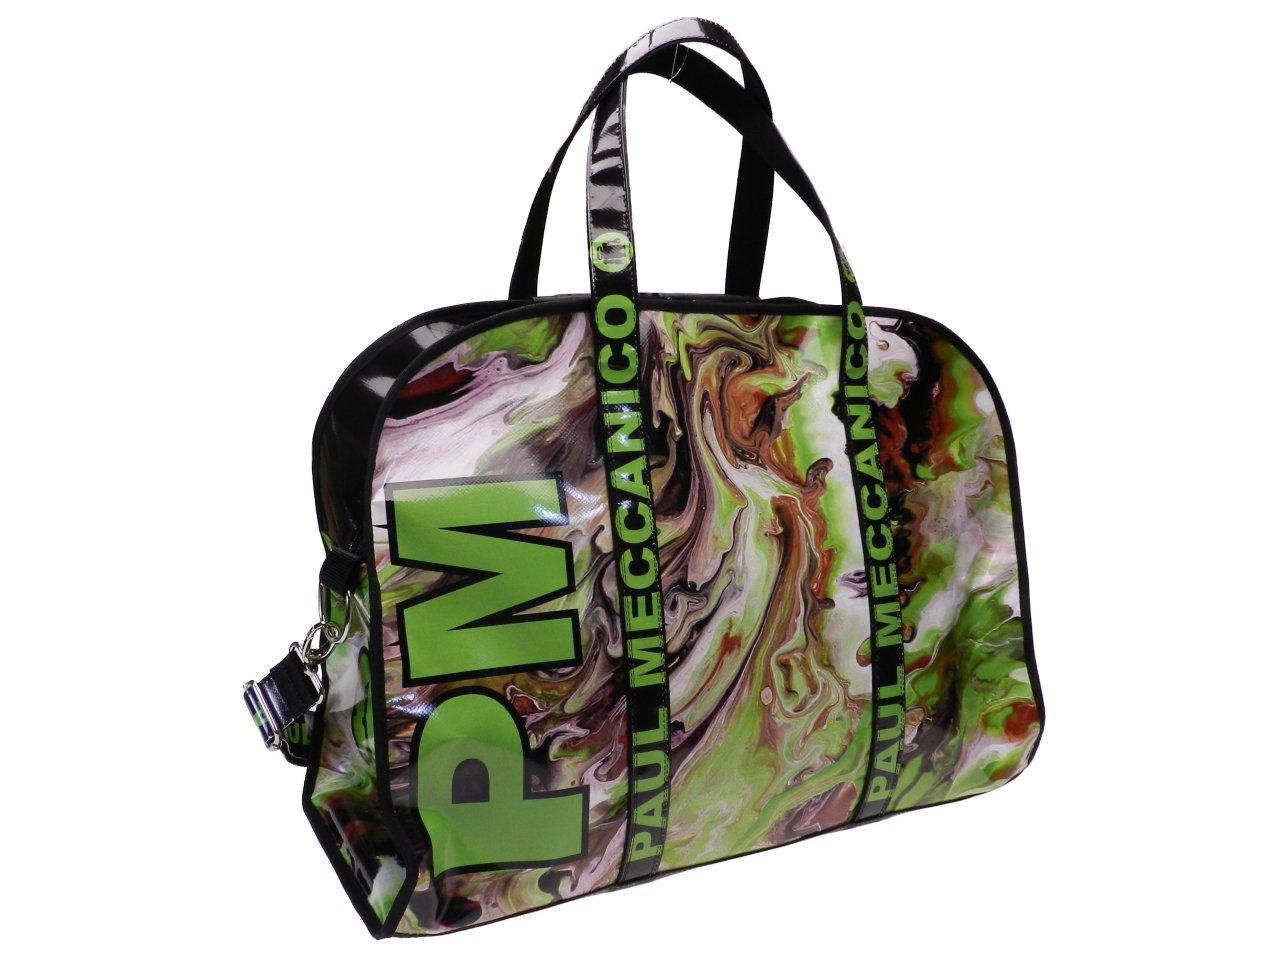 LARGE TRAVEL OR SPORTS BAG GREEN WITH CAMOUFLAGE FANTASY. MODEL RAID MADE OF LORRY TARPAULIN. - Unique Pieces Paul Meccanico